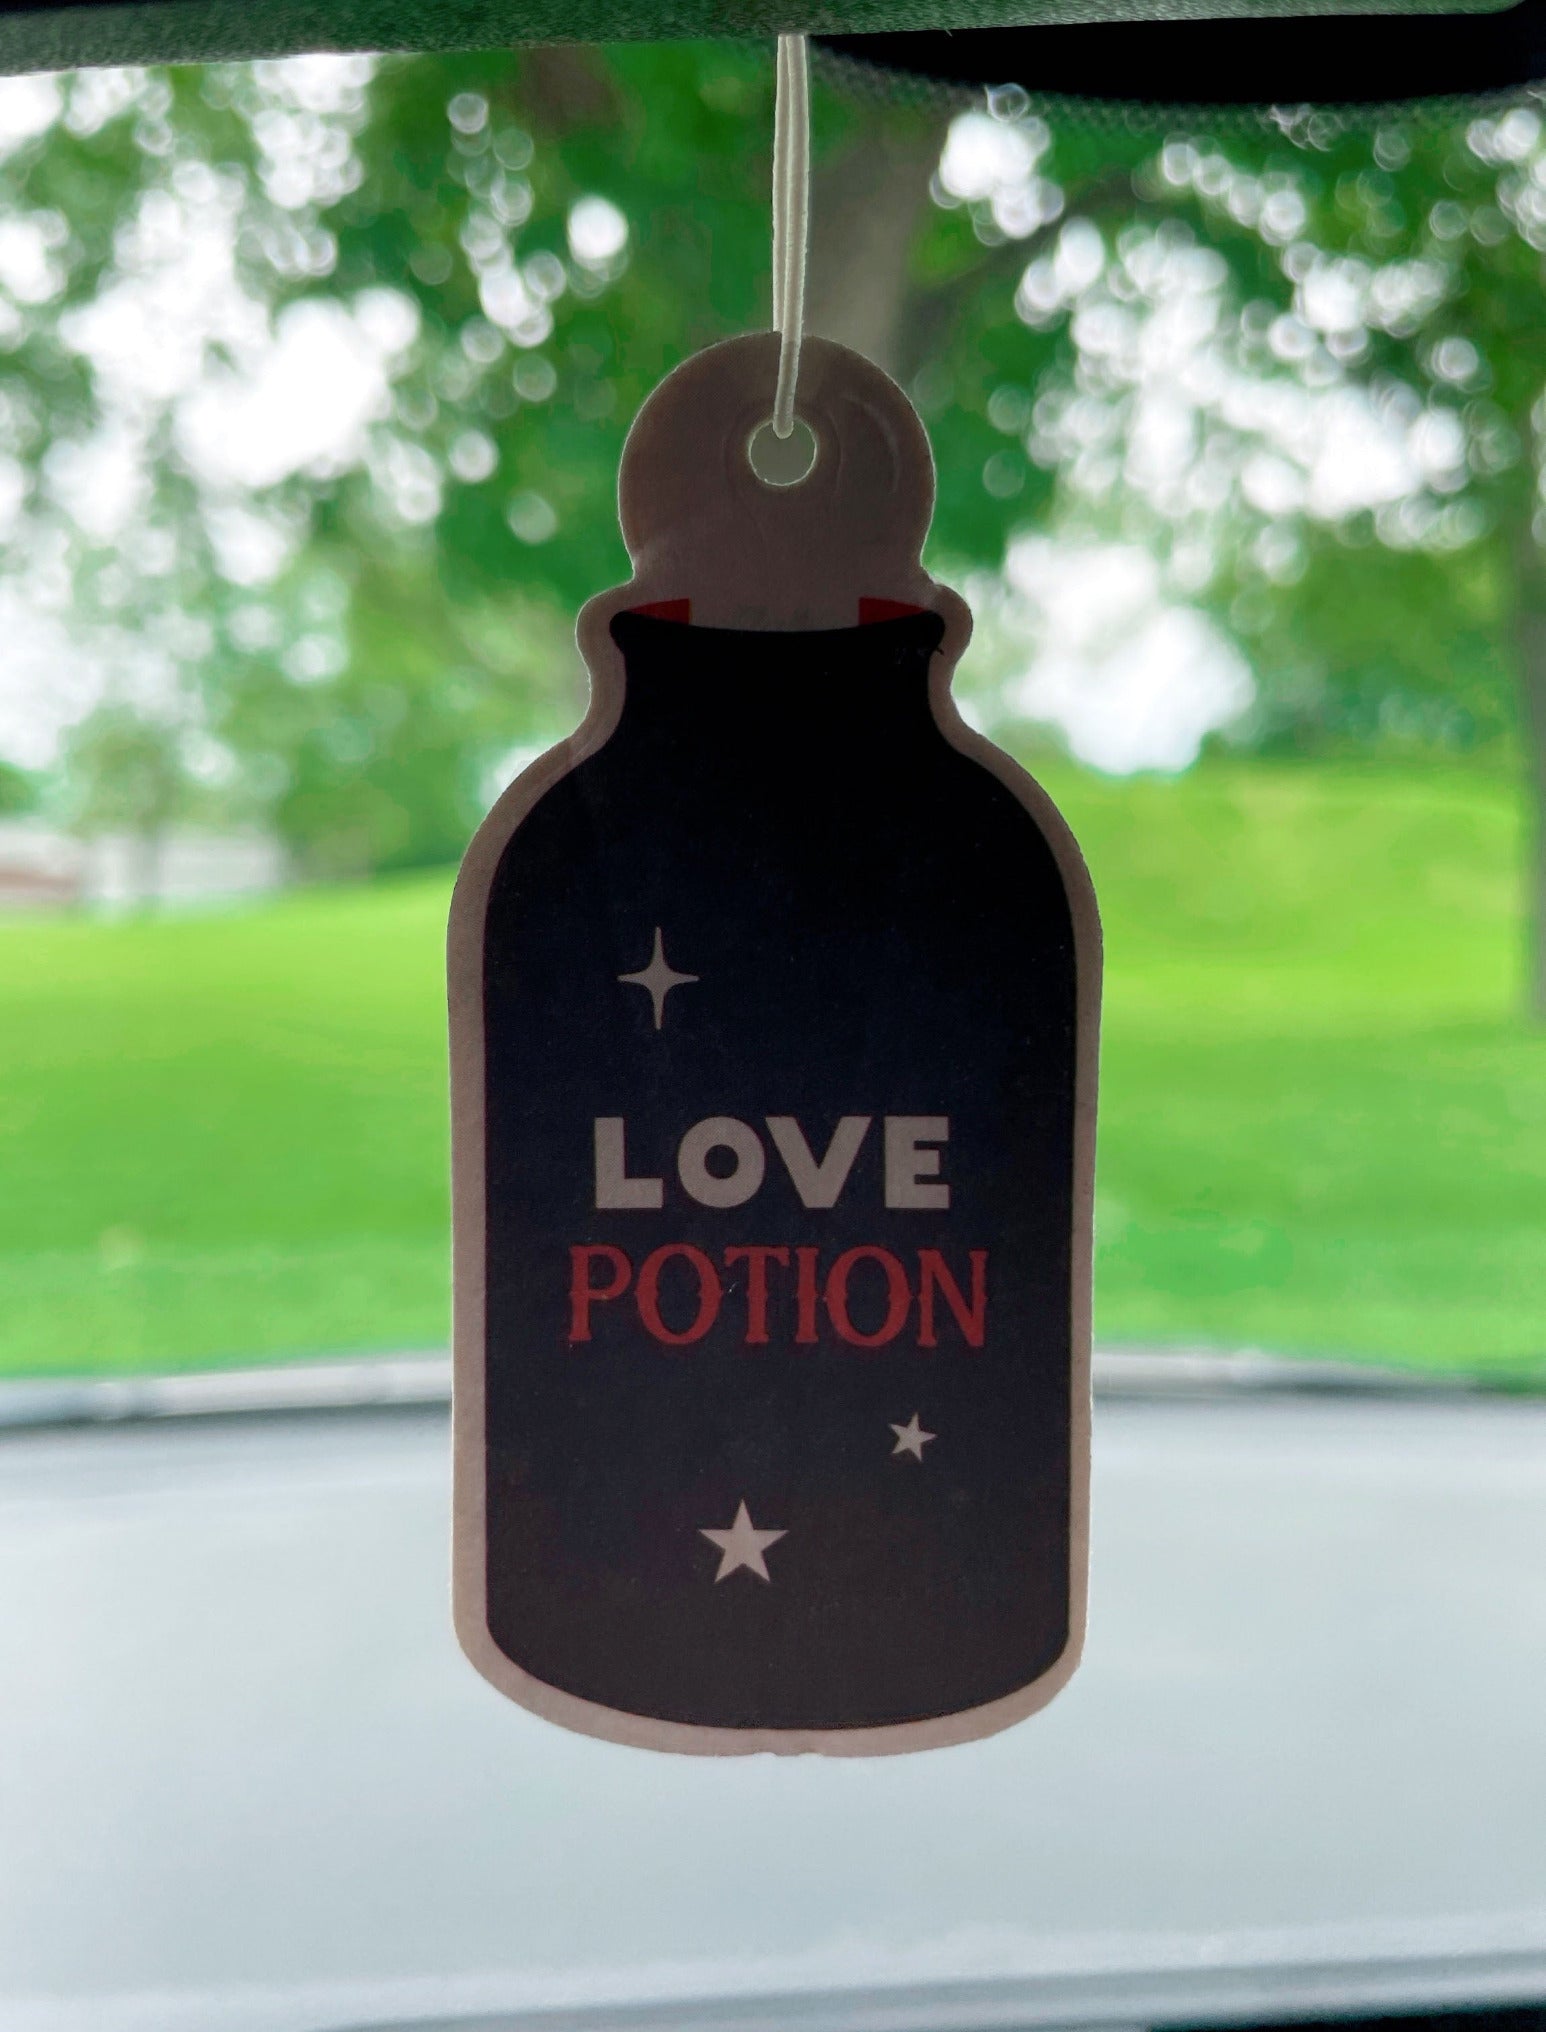 Pictured is an air freshener in the shape of love potion.